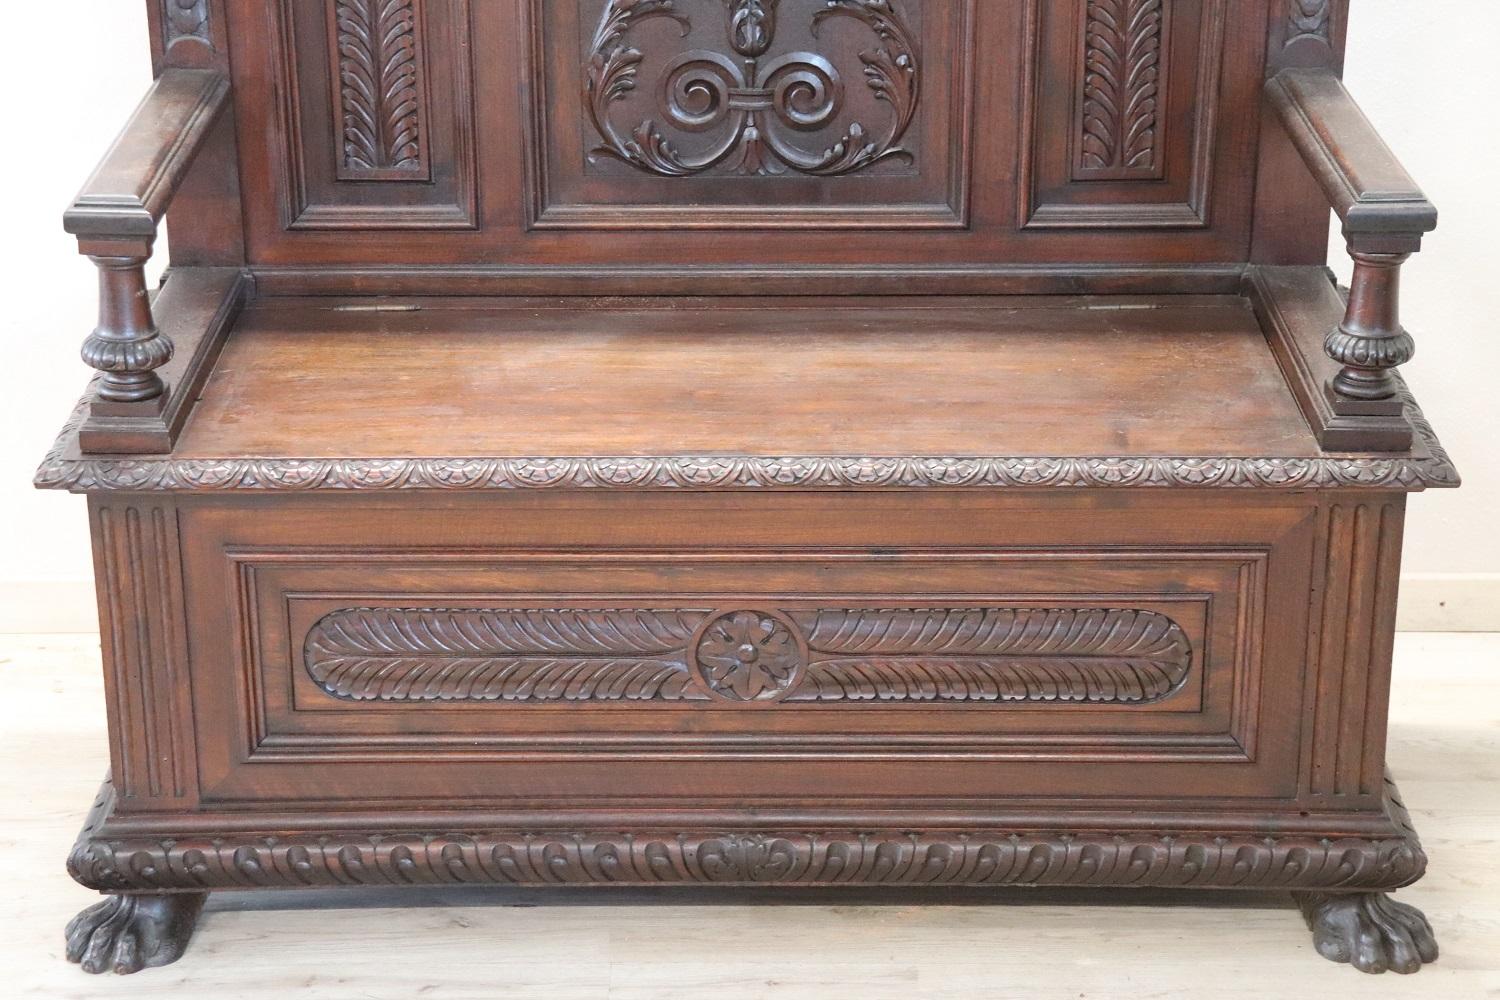 Majestic Italian bench in late 19th century Renaissance style. Made of walnut wood with carved decorations in Renaissance style with grotesque faces. Fantastic big paw feet. High and imposing backrest, the seat rises and inside we find a comfortable